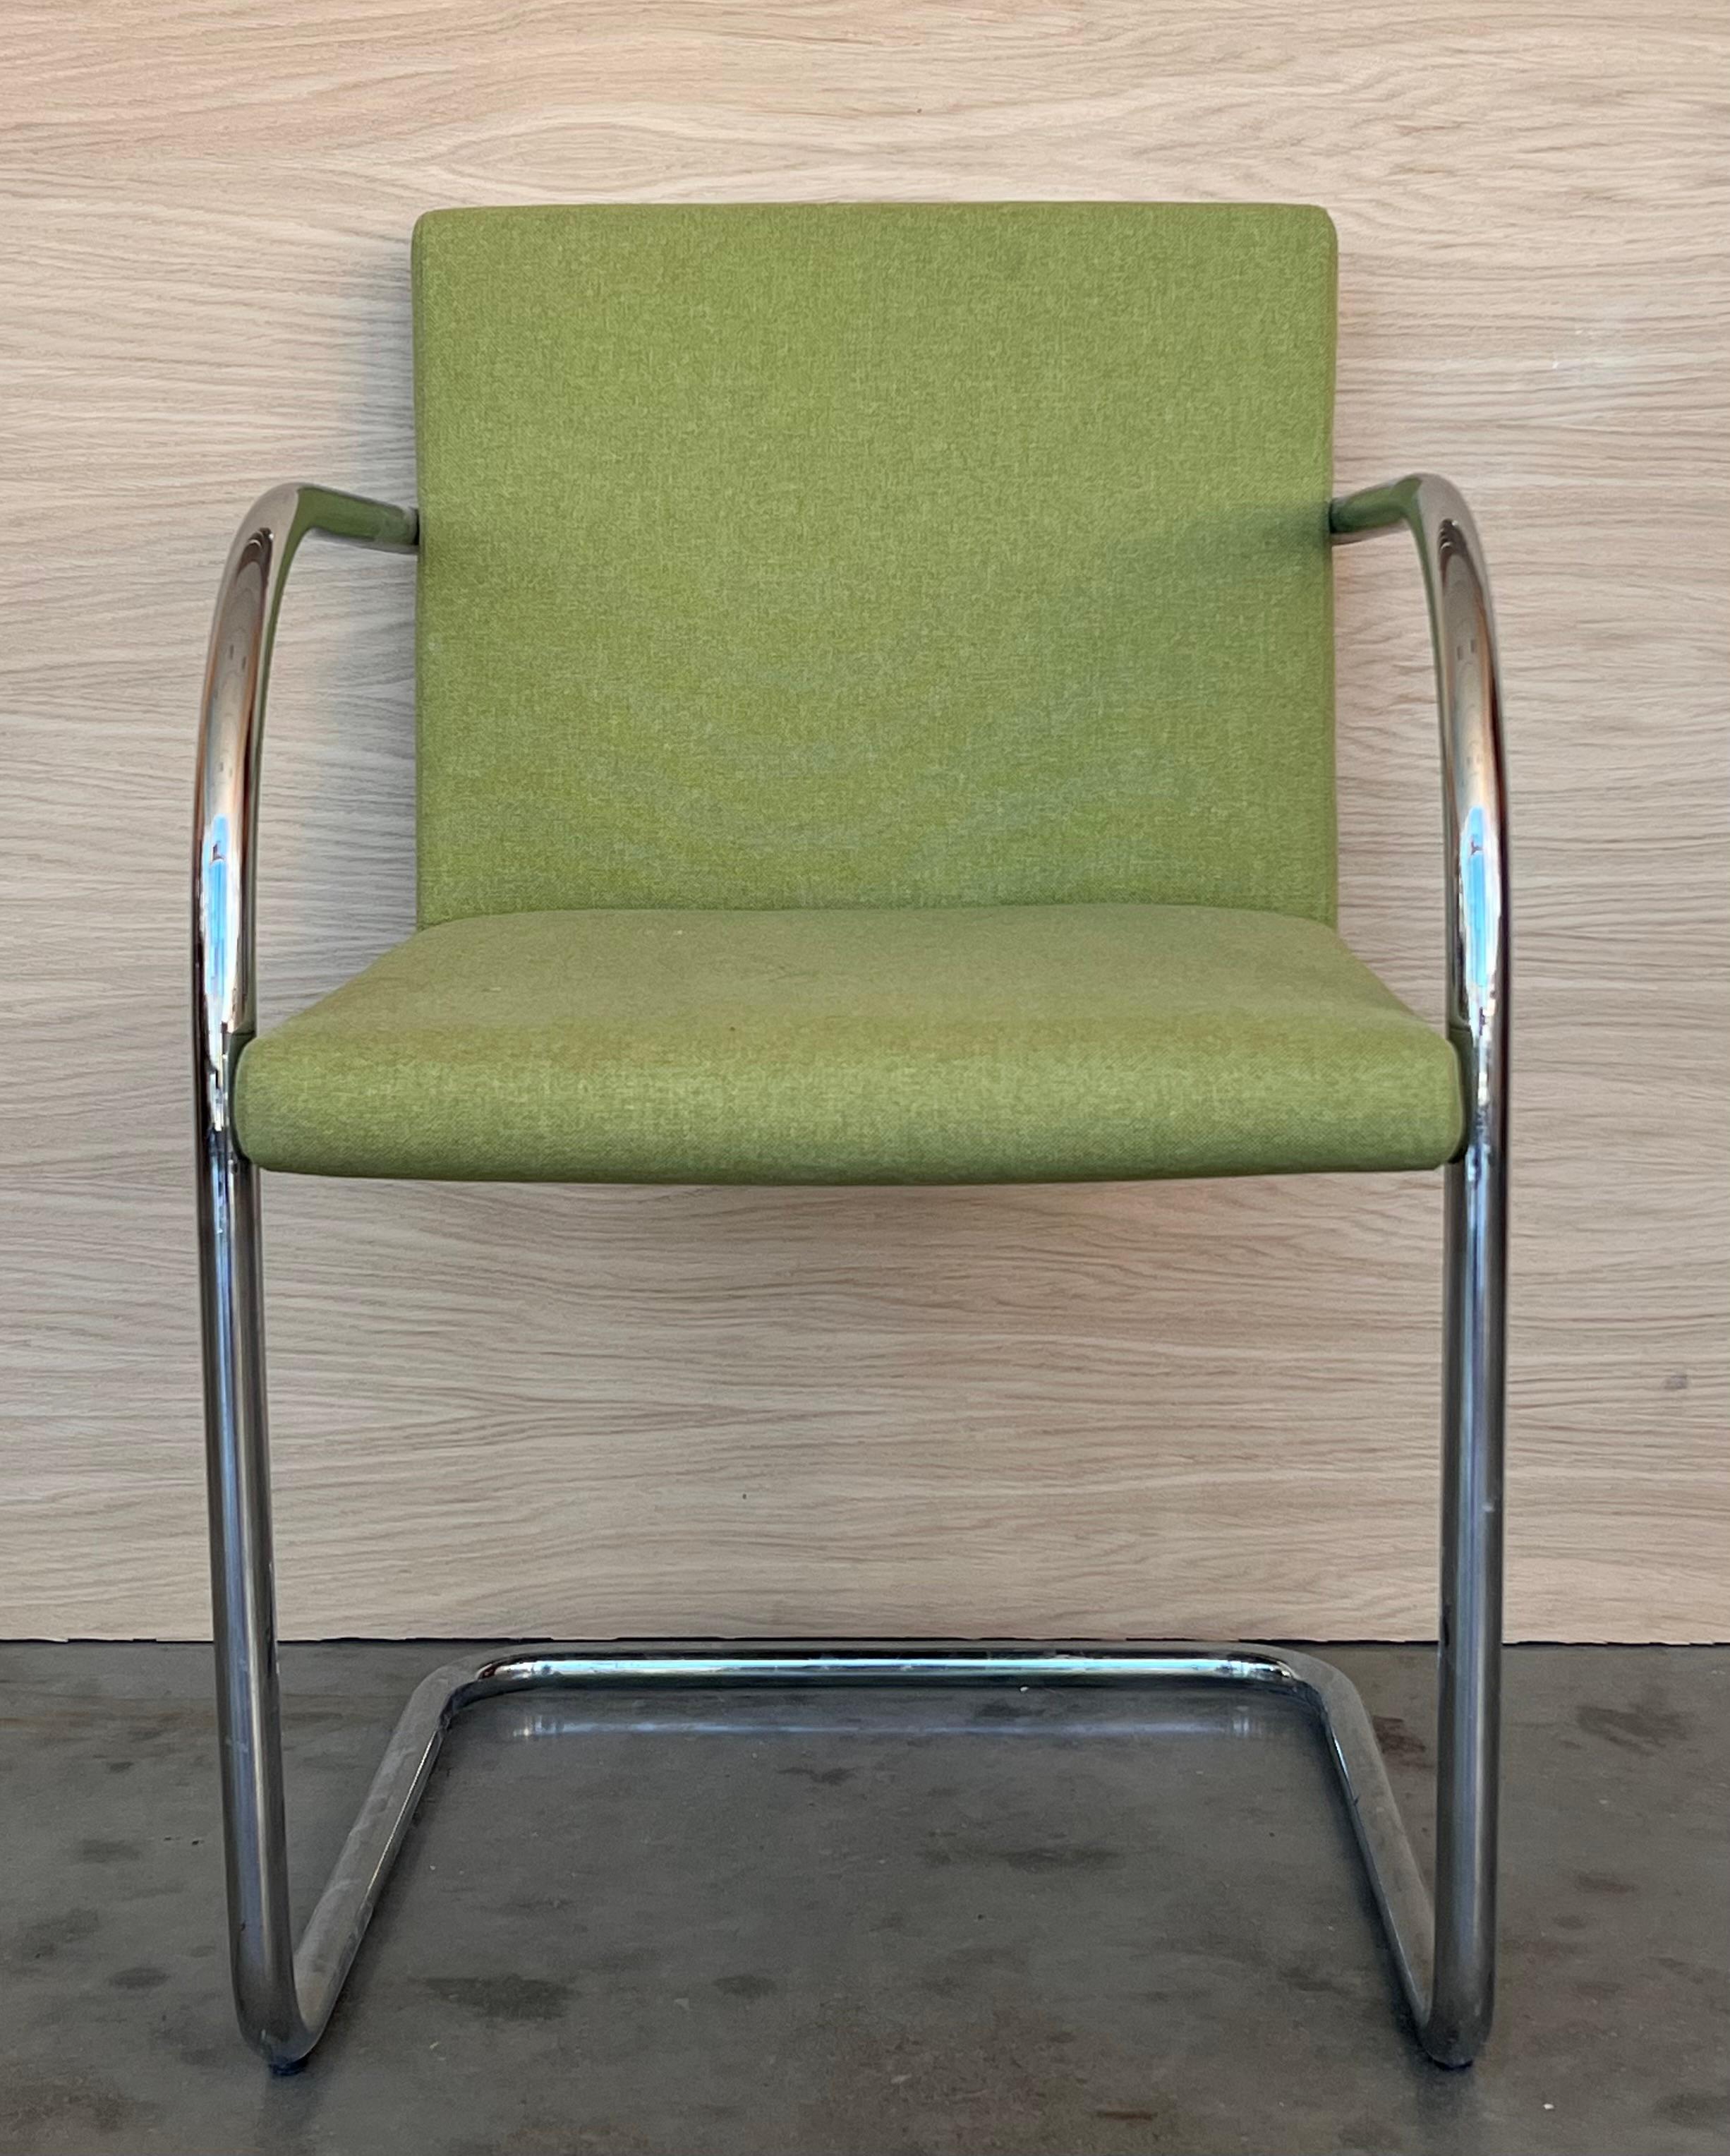 These tubular Brno chairs by Mies van deer Rohe have stainless steel frames and are upholstered in Eames green fabric, giving a lighter, playful touch to an otherwise sober refined design.   